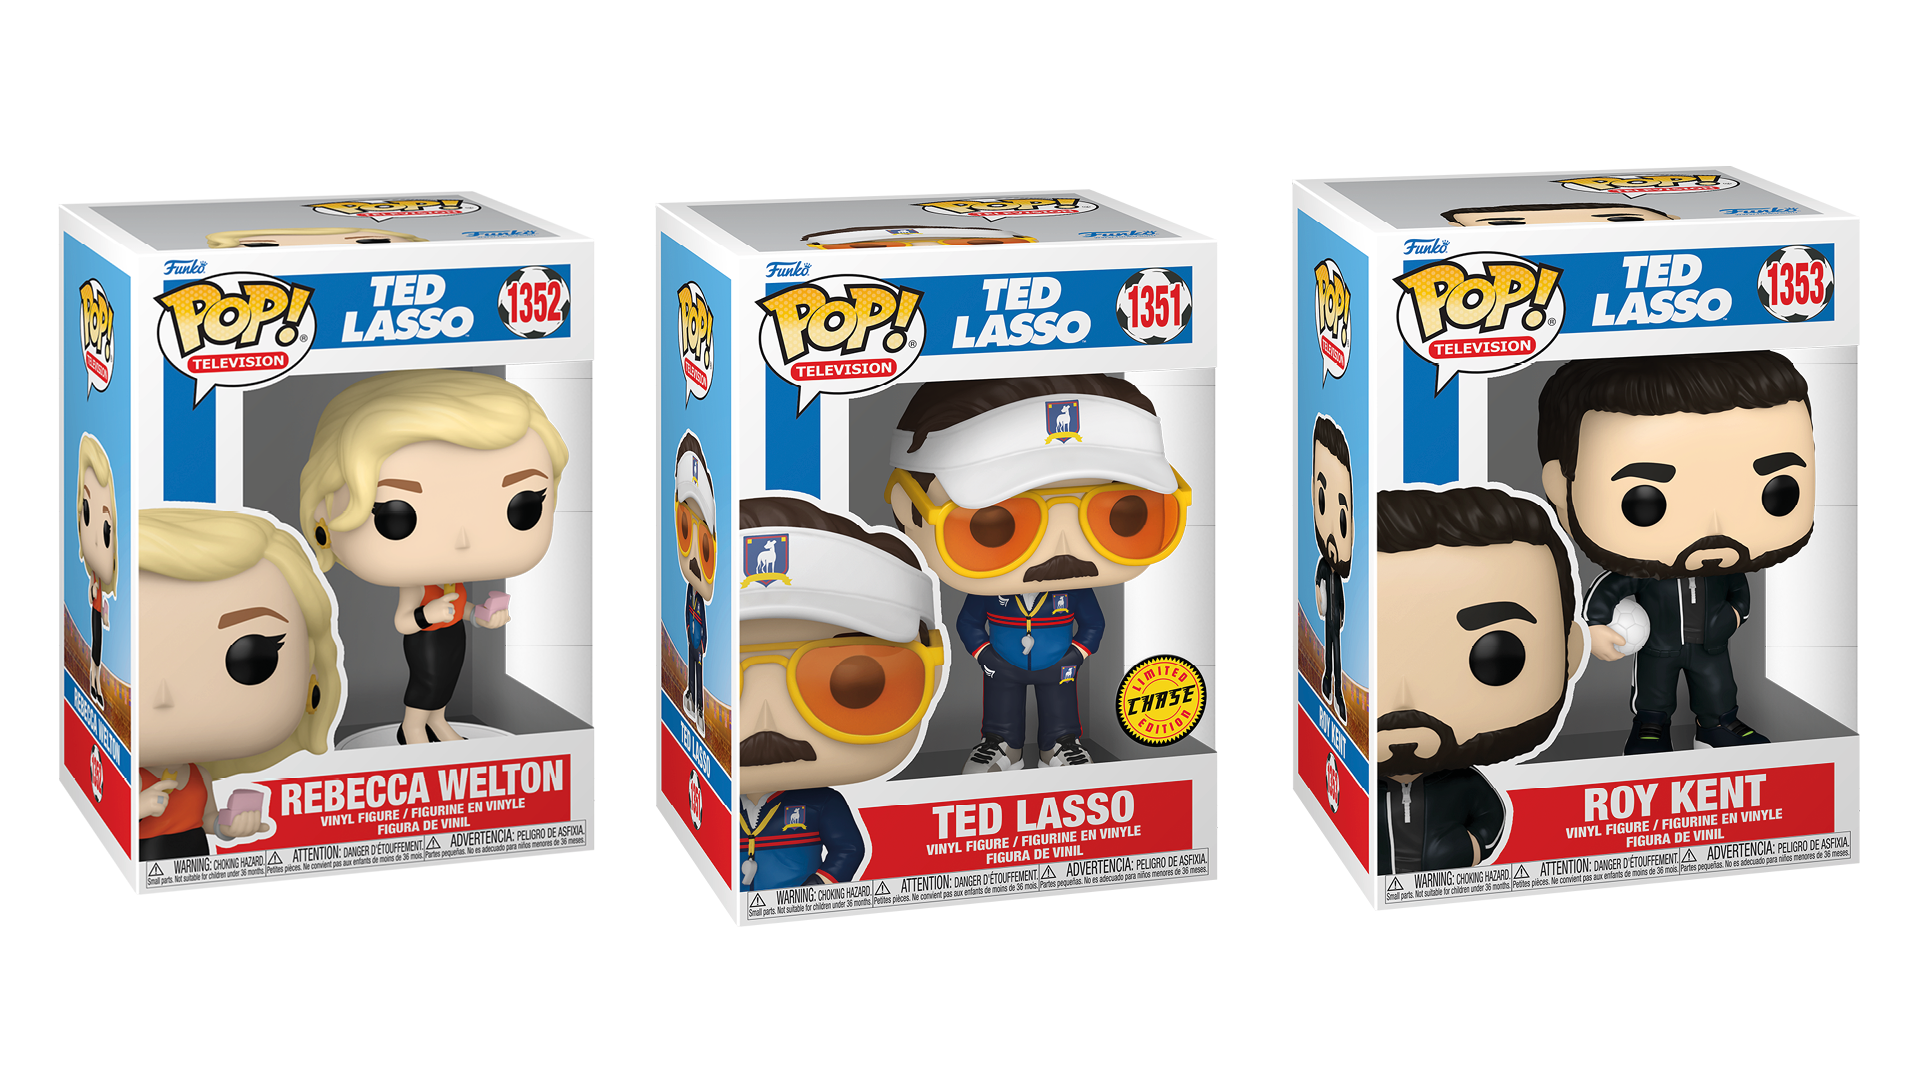 Ted Lasso' Funko Pops! Launched | License Global